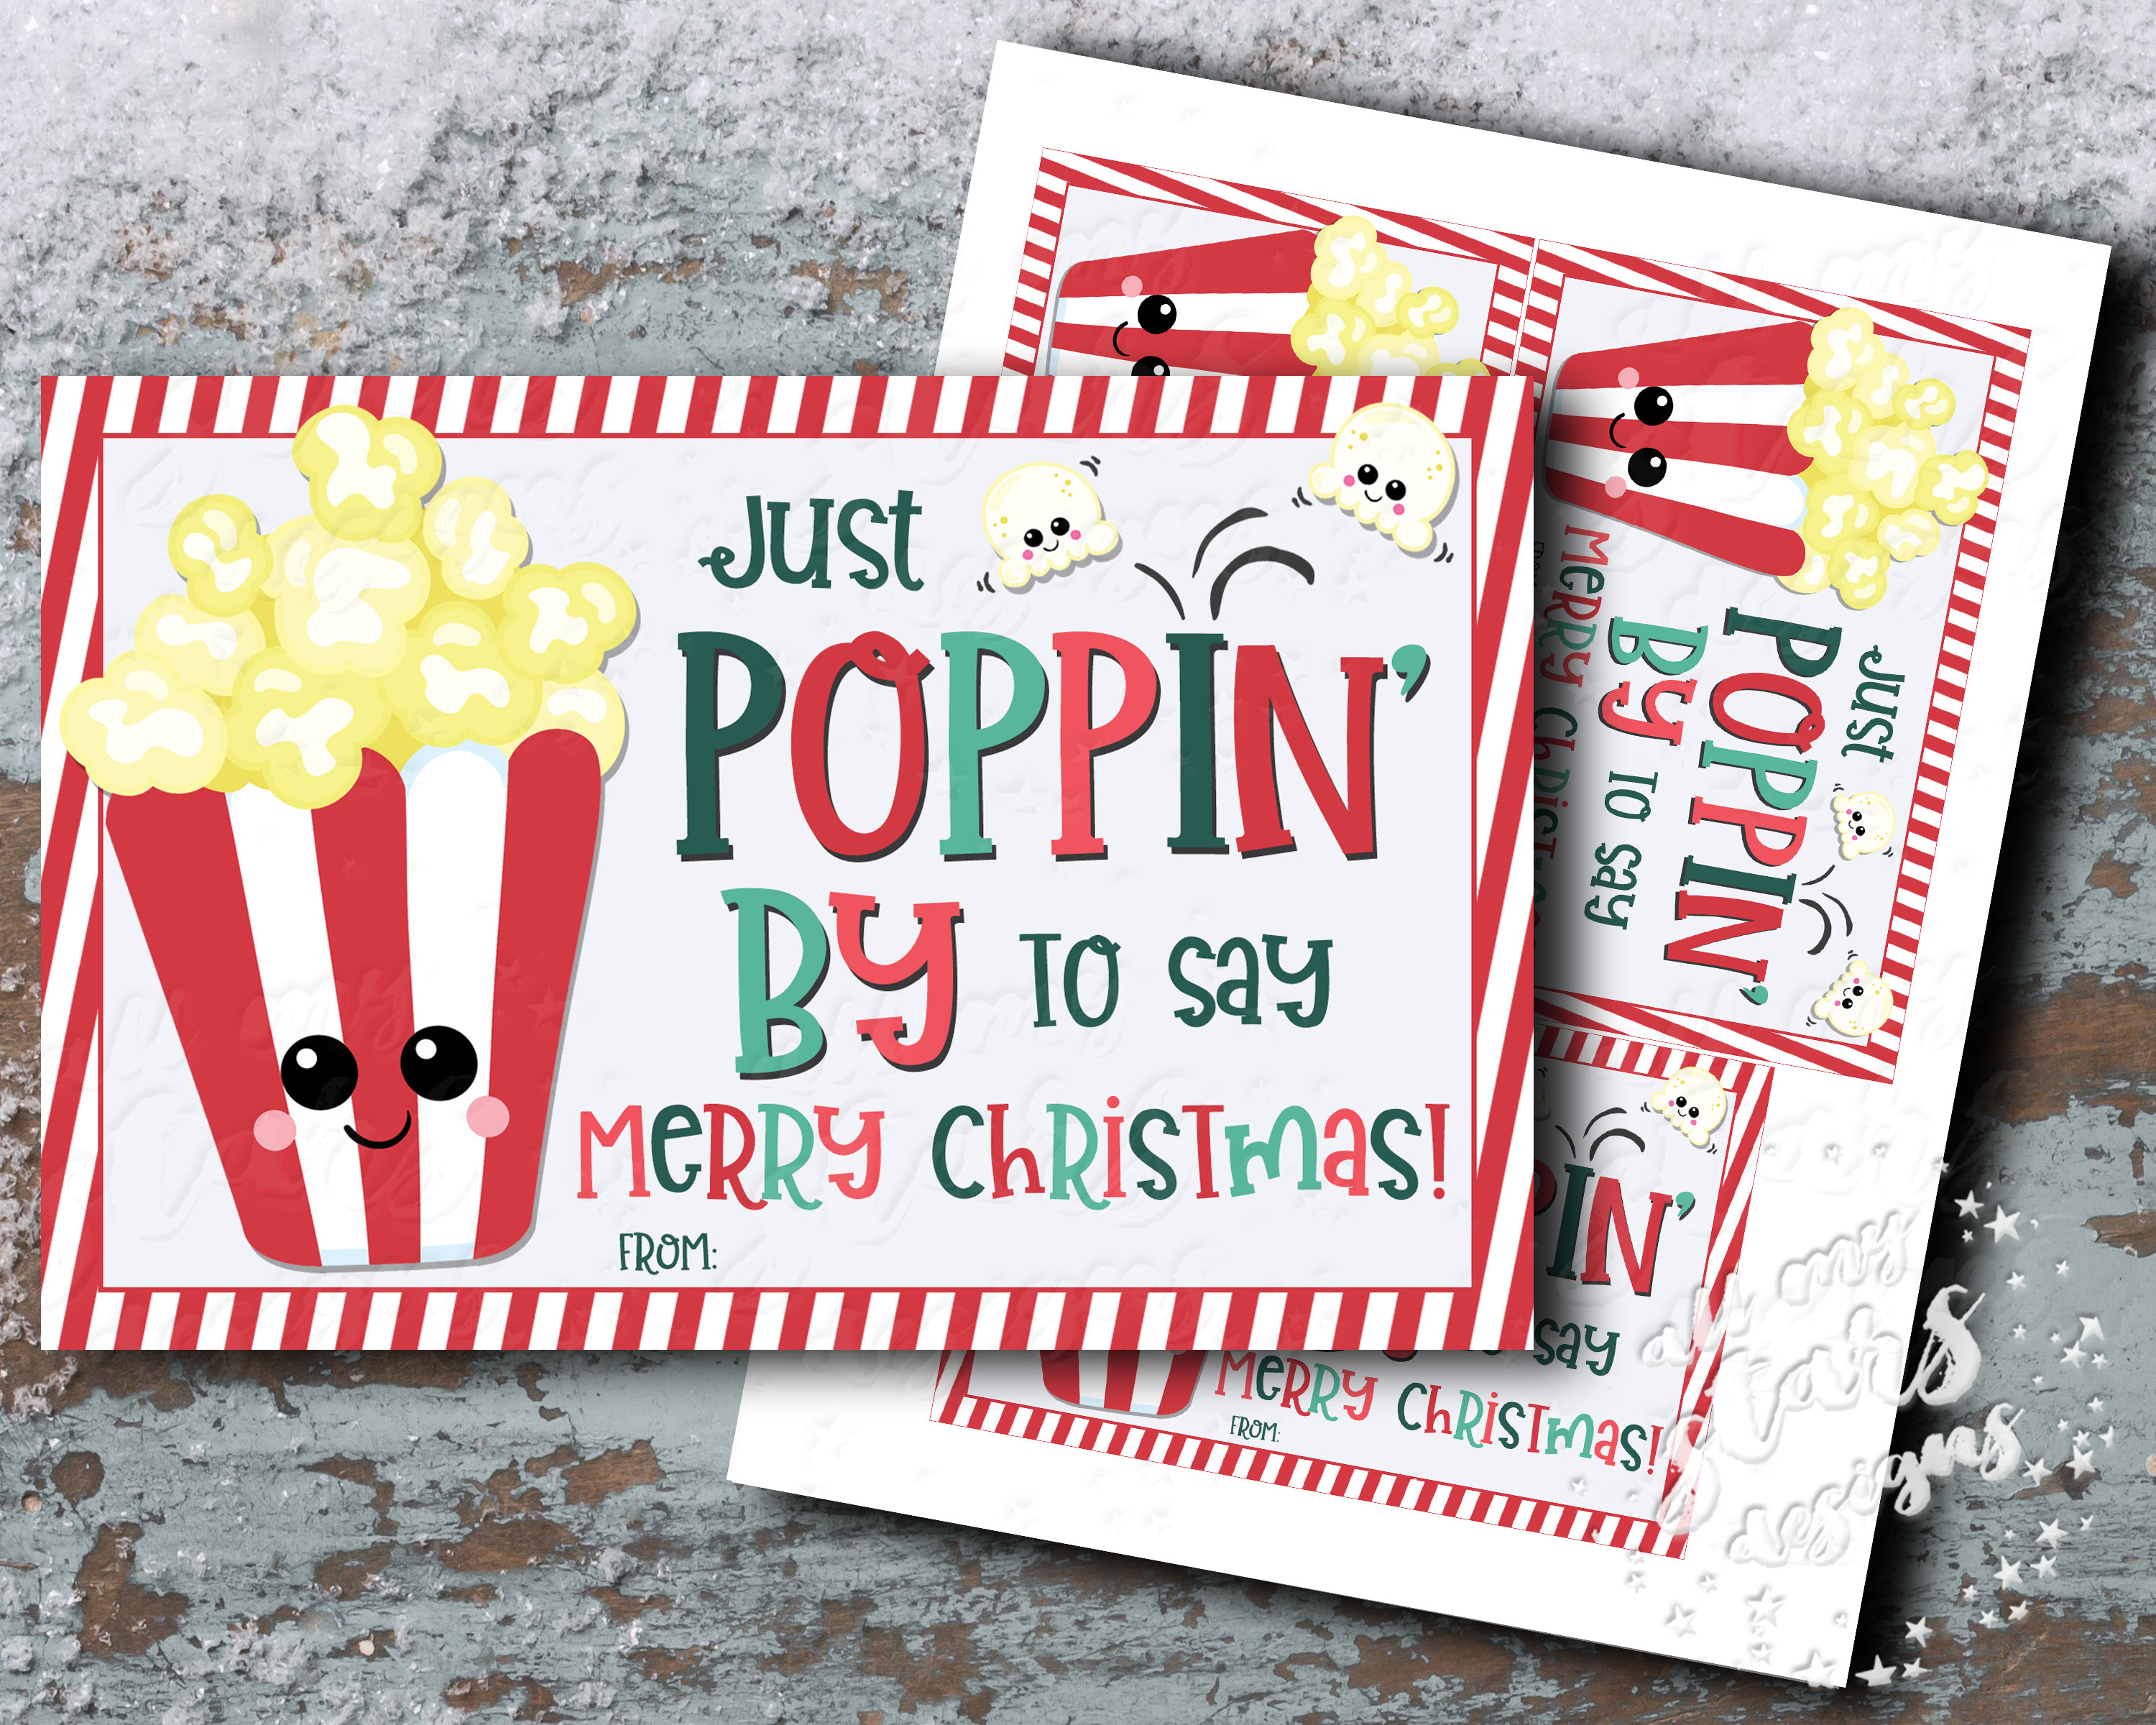 printable-just-poppin-by-to-say-merry-christmas-tag-etsy